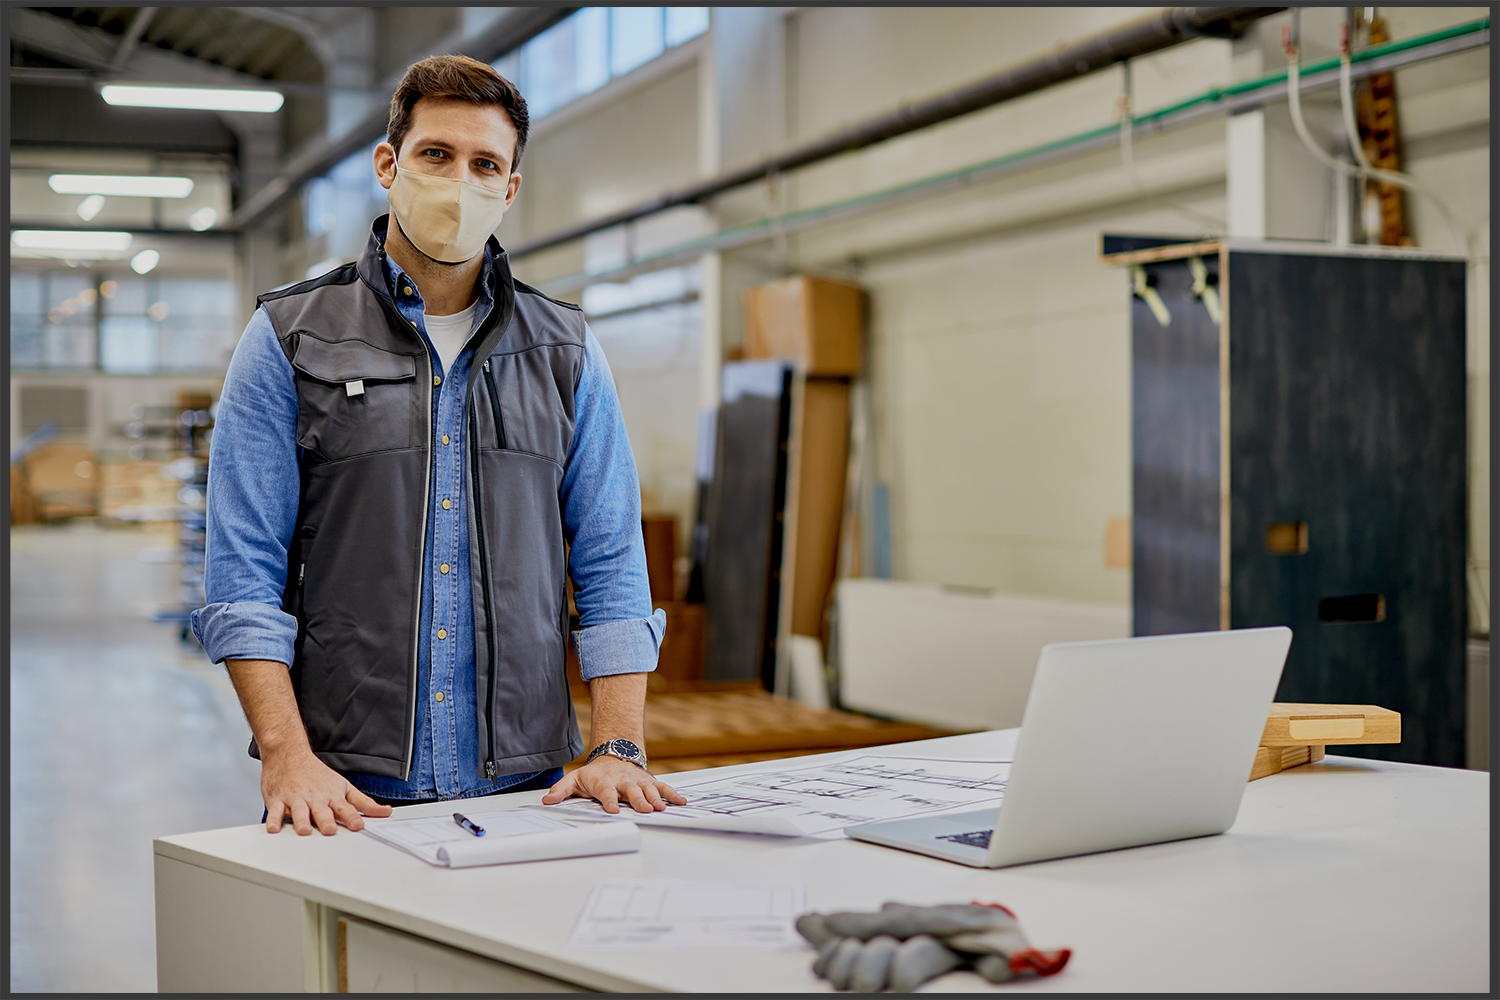 woodworking-engineer-with-face-mask-working-at-industrial-facility-and-looking-at-camera